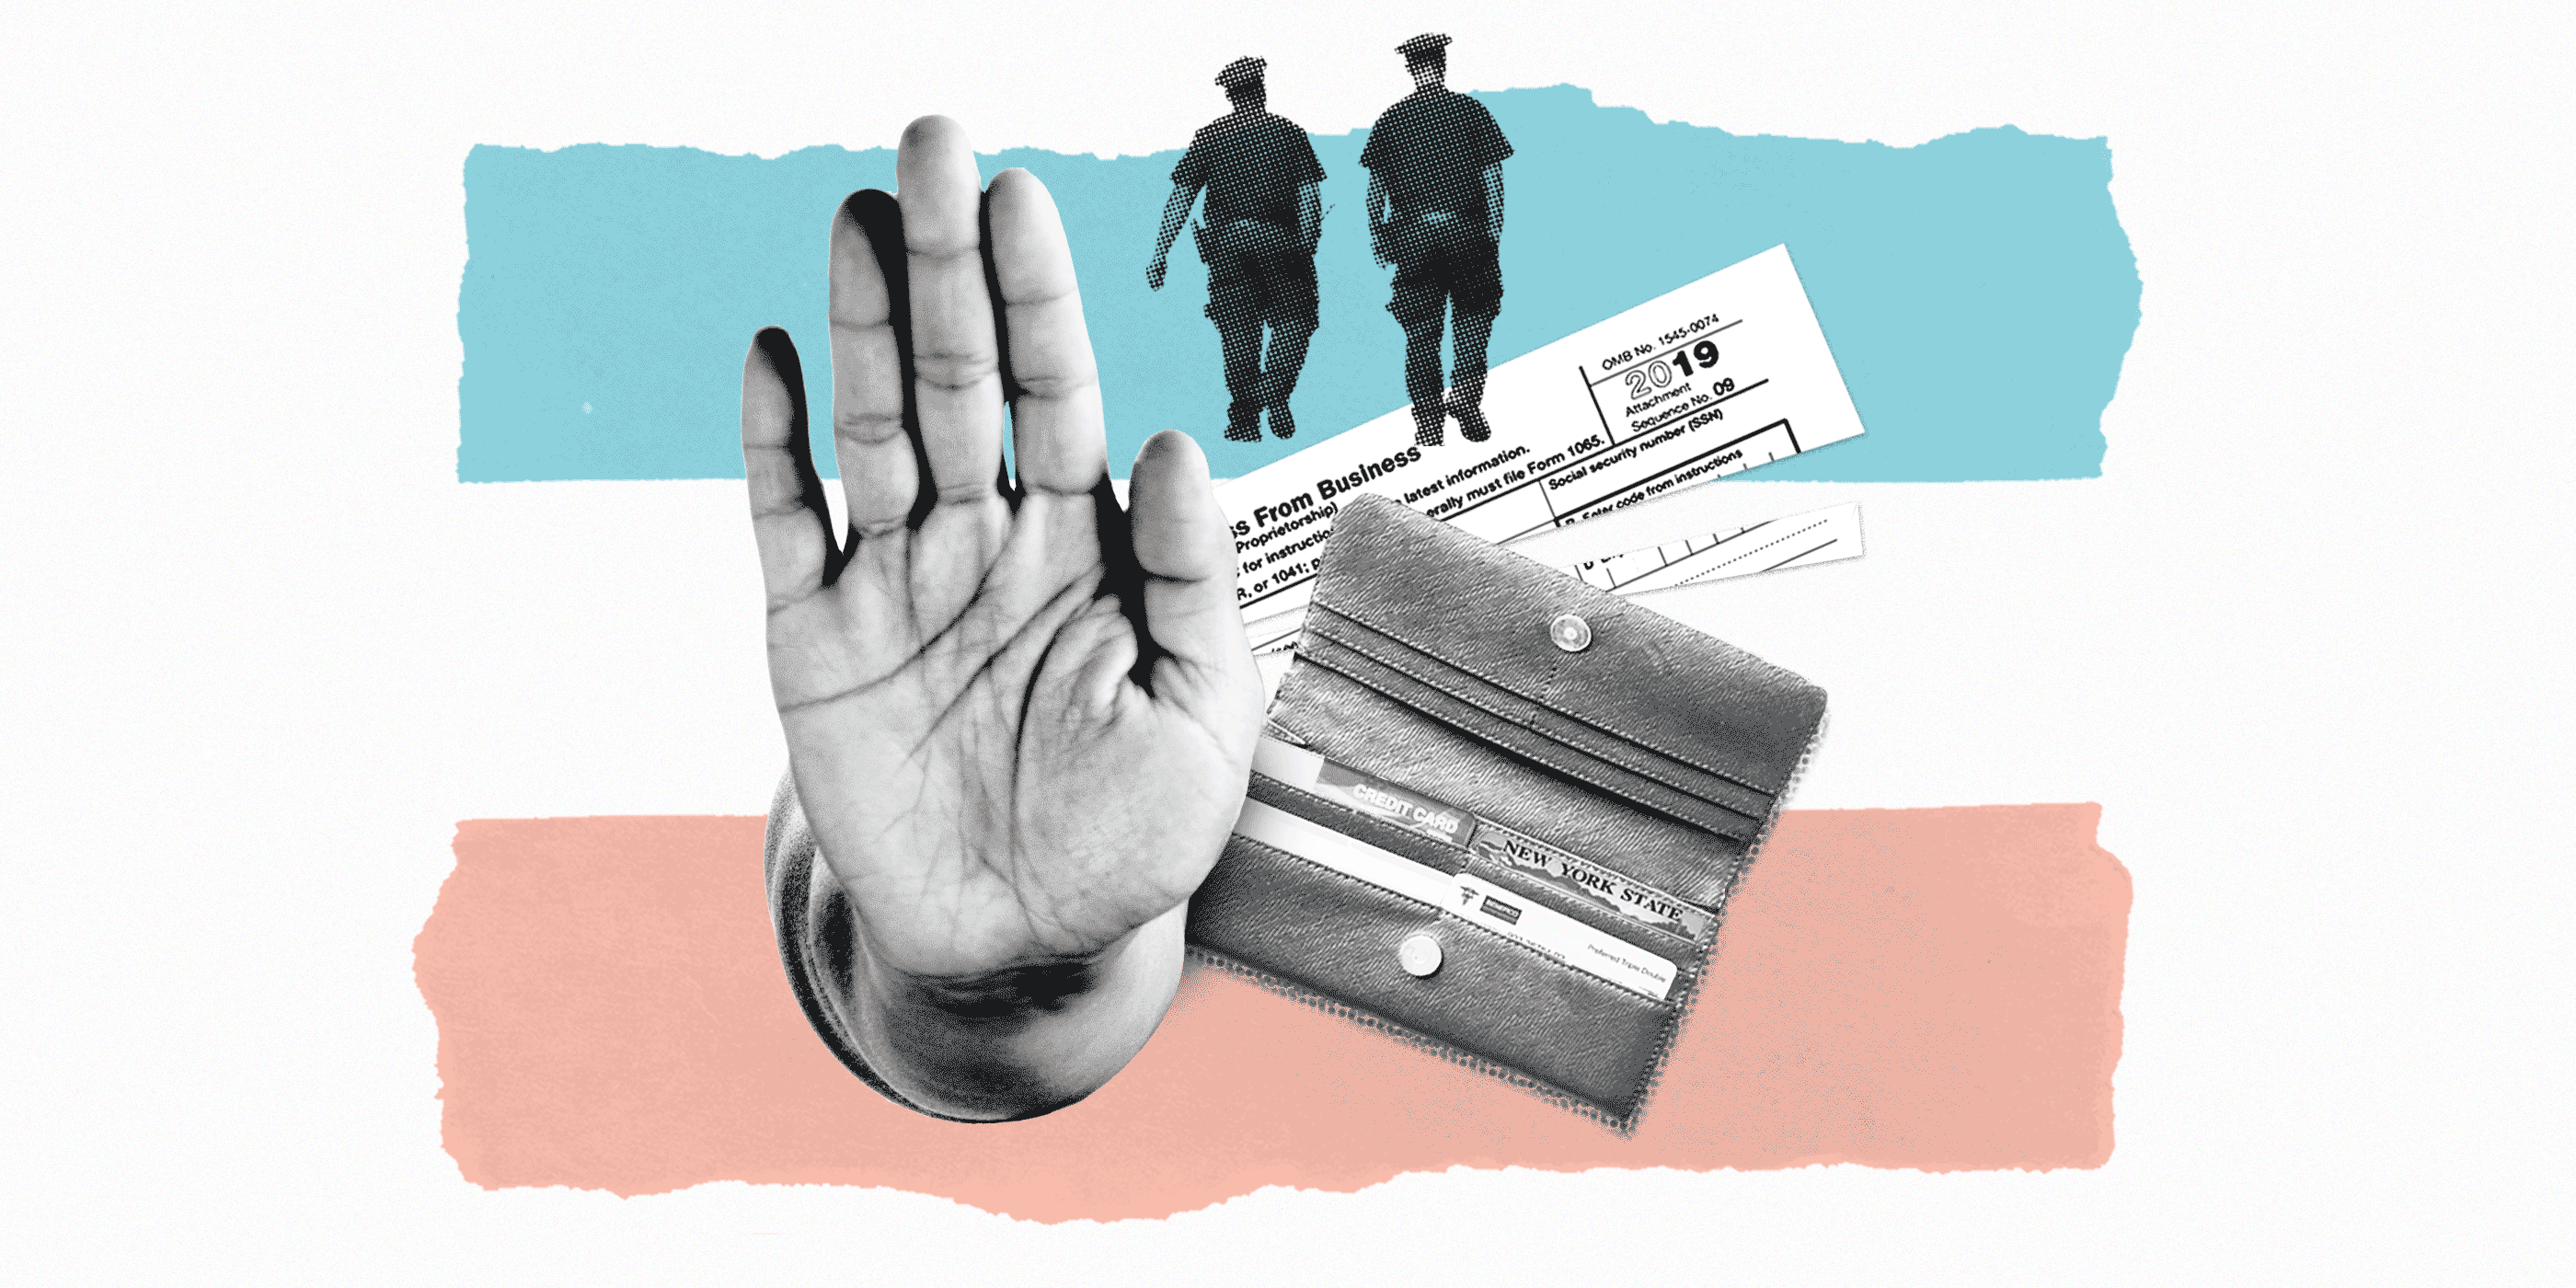 A collage of a palm of the hand, an open wallet, and cops over a transgender flag in the background.